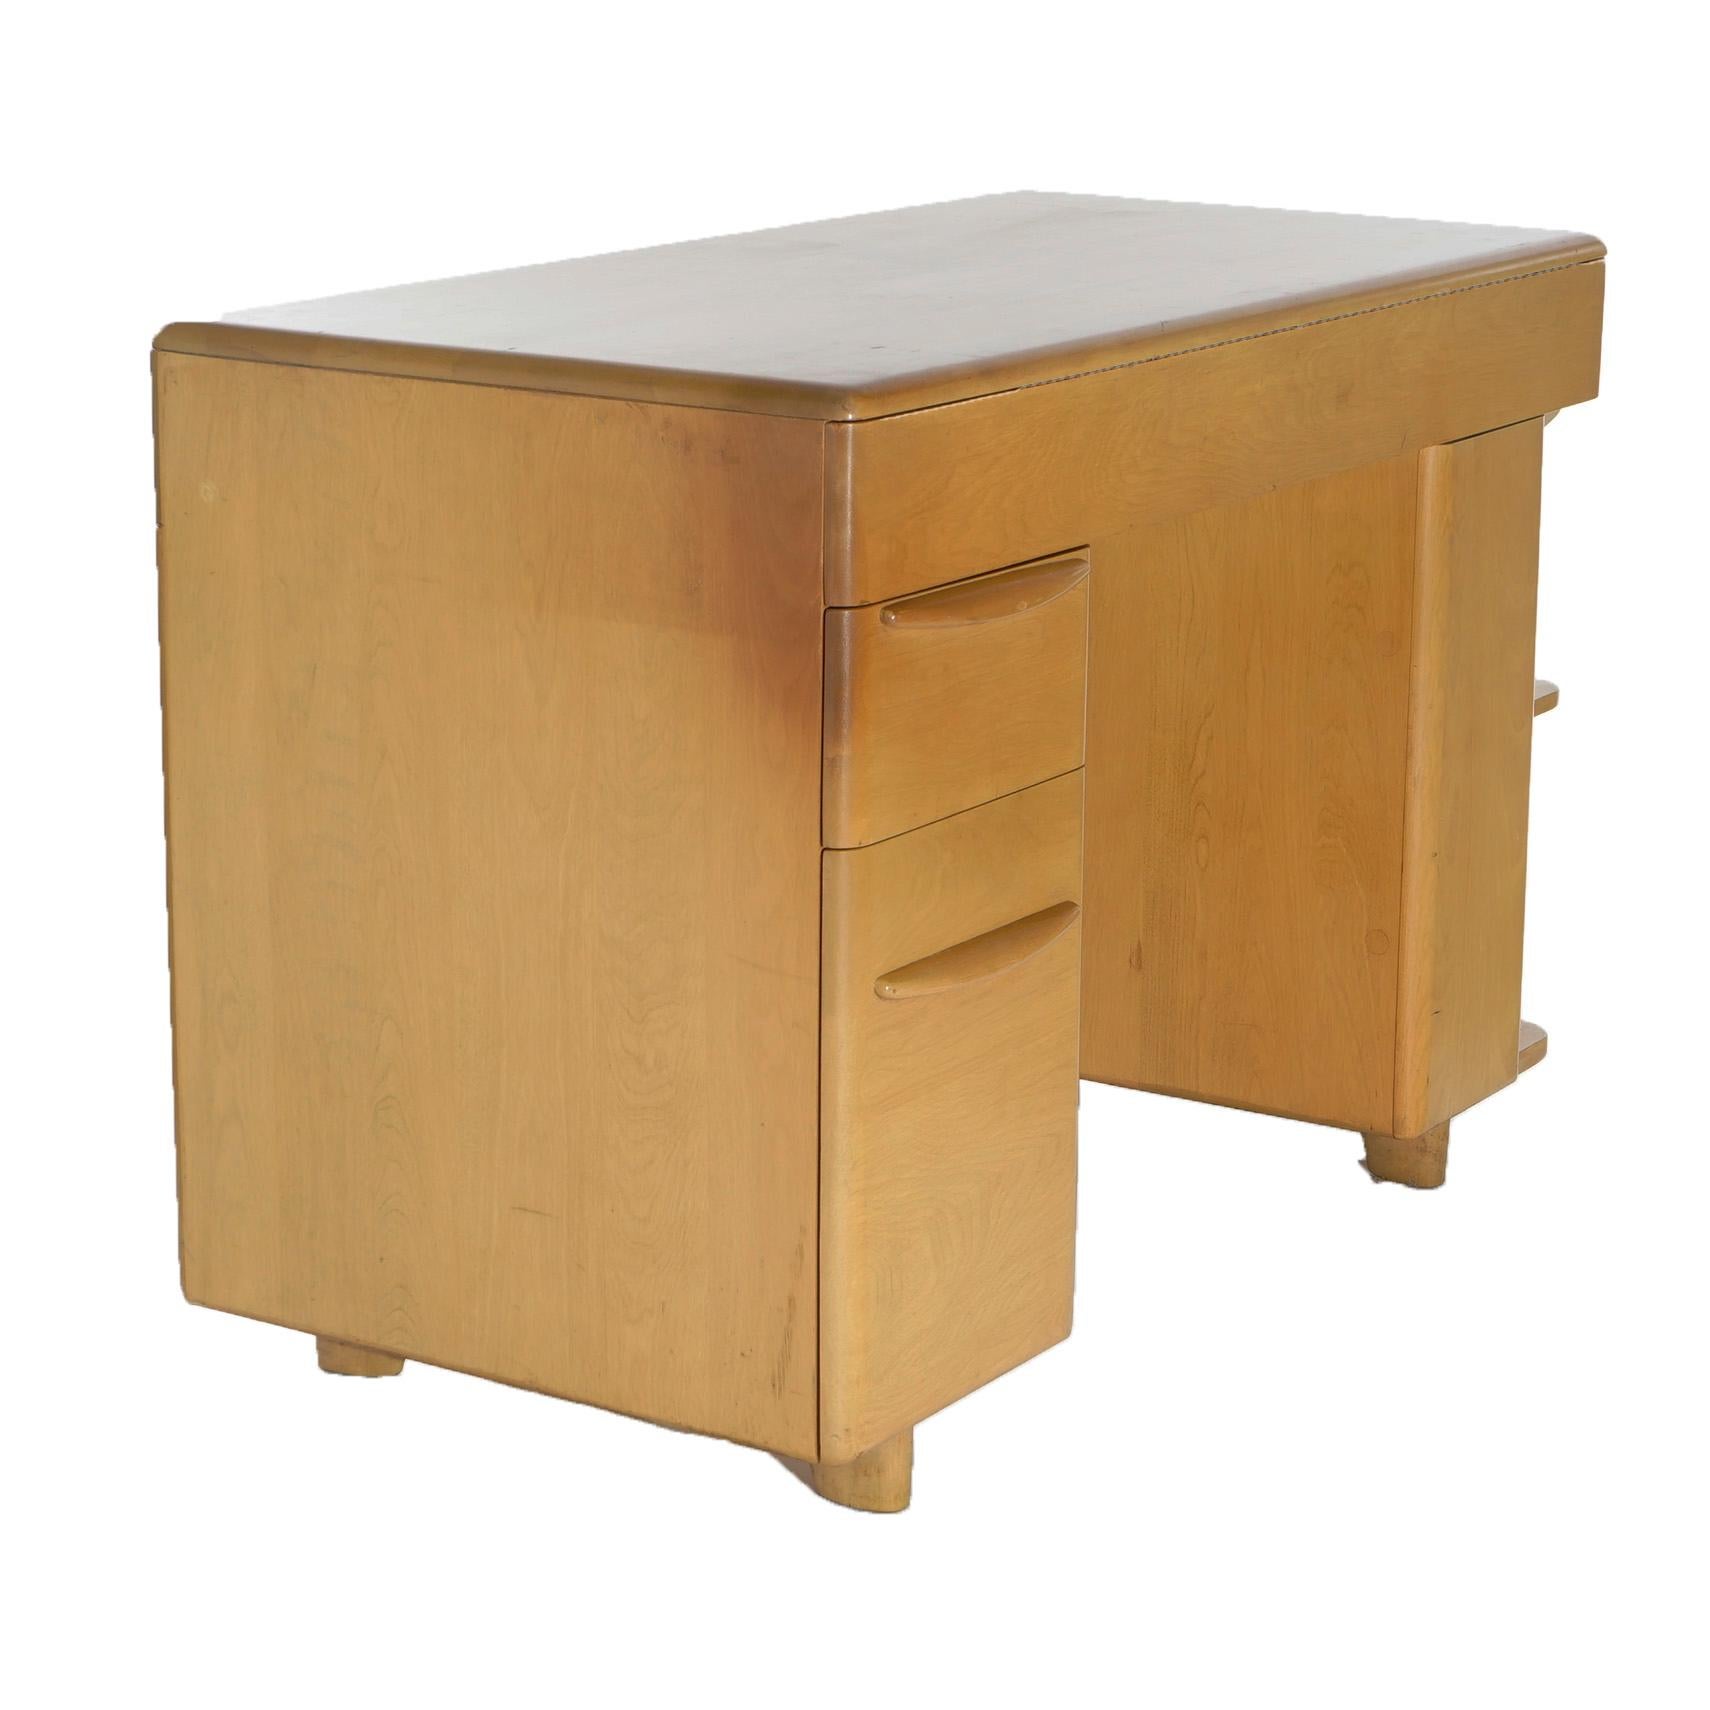 A Mid-Century Modern desk by Heywood Wakefield offers birch construction with frieze drawer over kneehole with flanking drawer tower and shelving tower, maker label as photographed, c1950

Measures- 30.25''H x 44''W x 22.75''D.

*Ask about